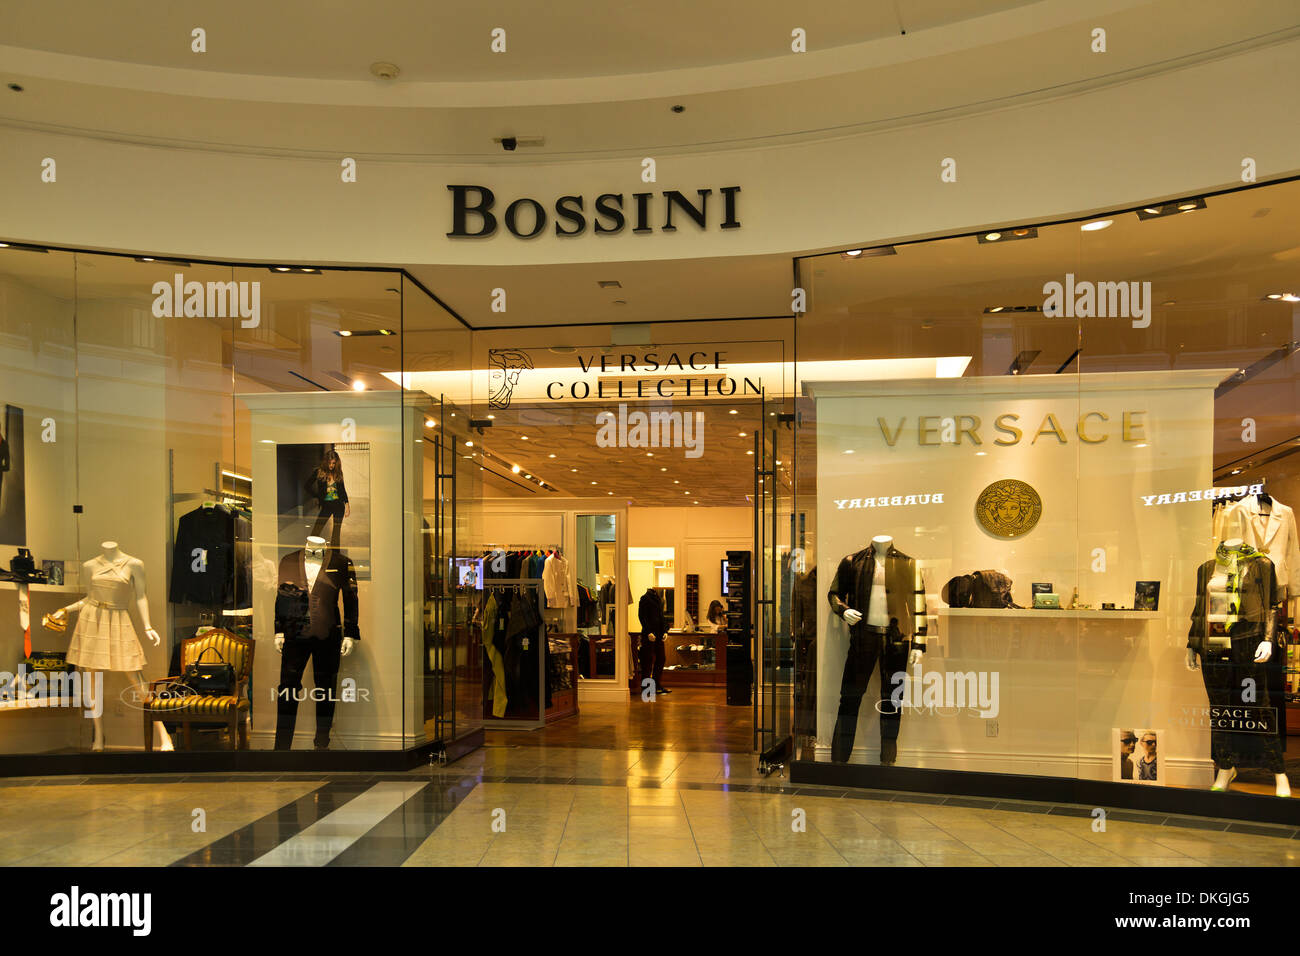 Bossini Versace Collection at Westfield Valley Fair Mall, Santa